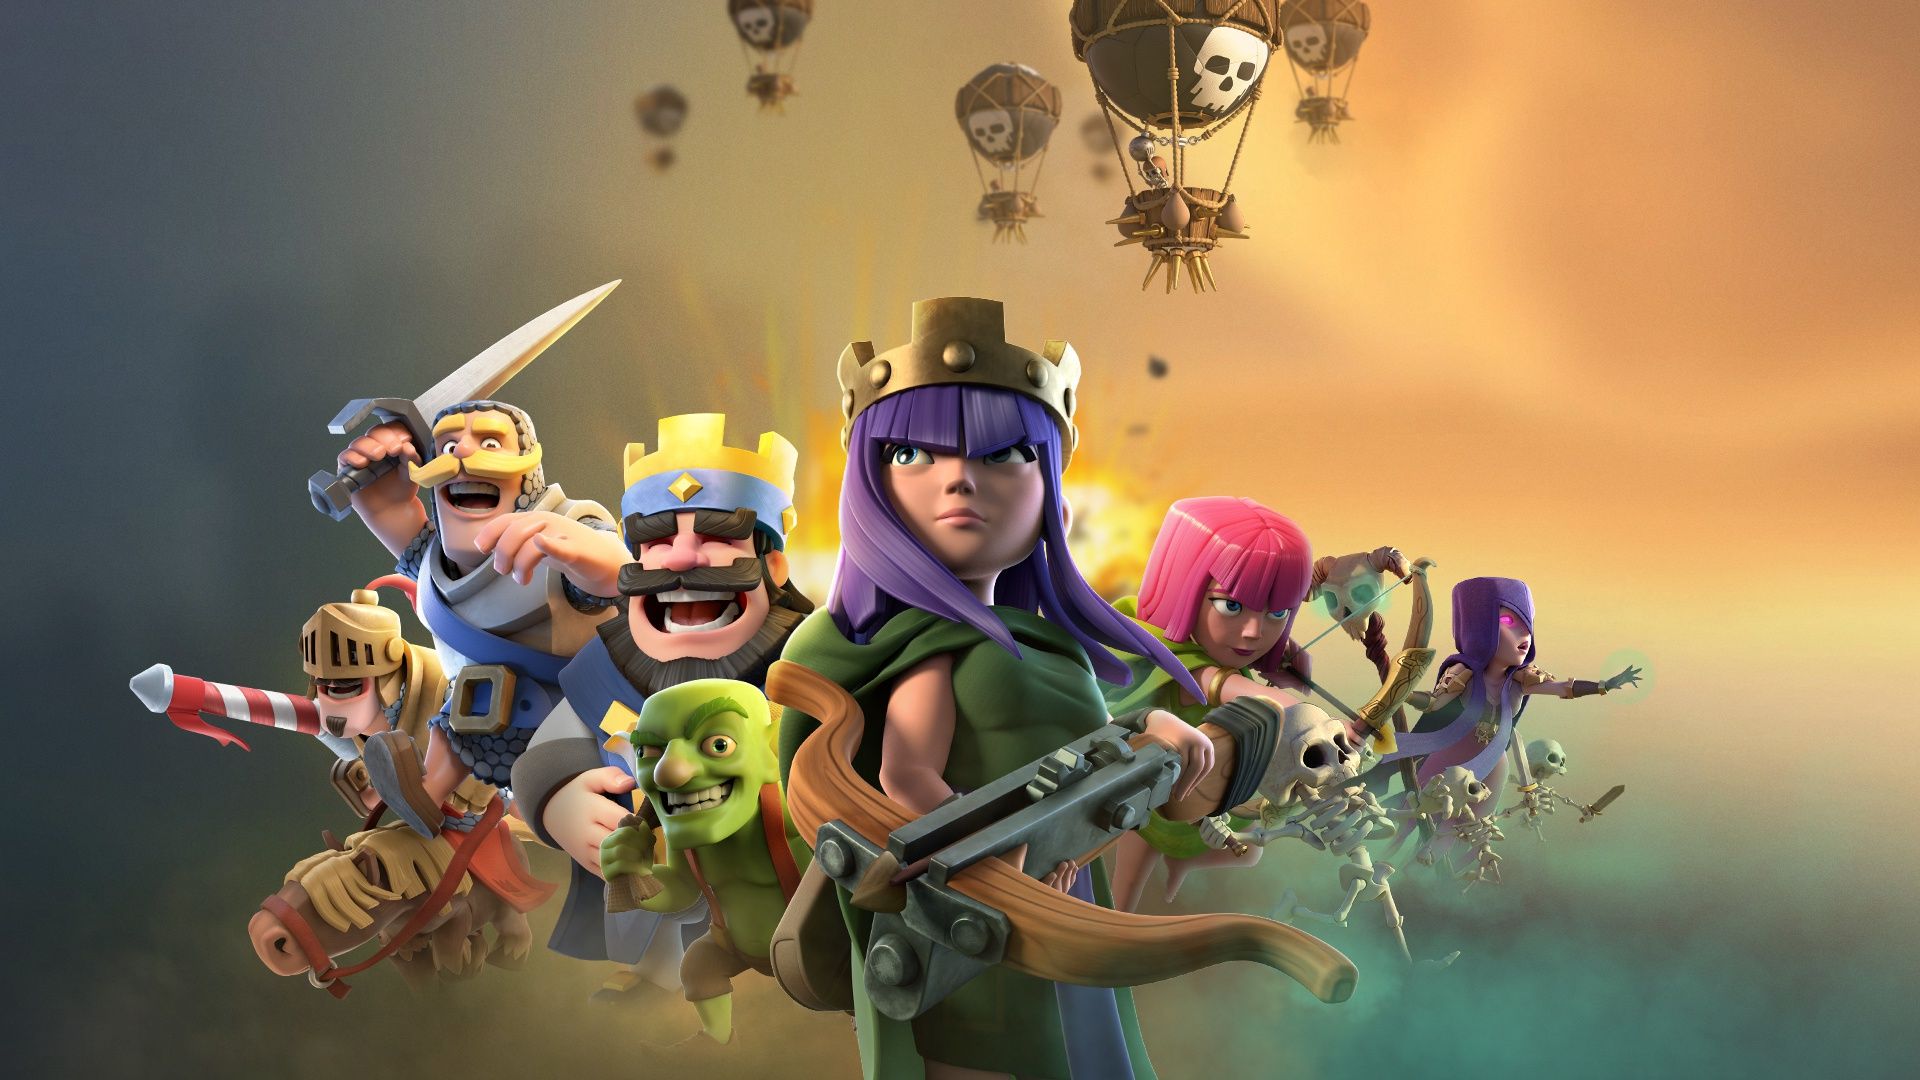 clash of clans for pc